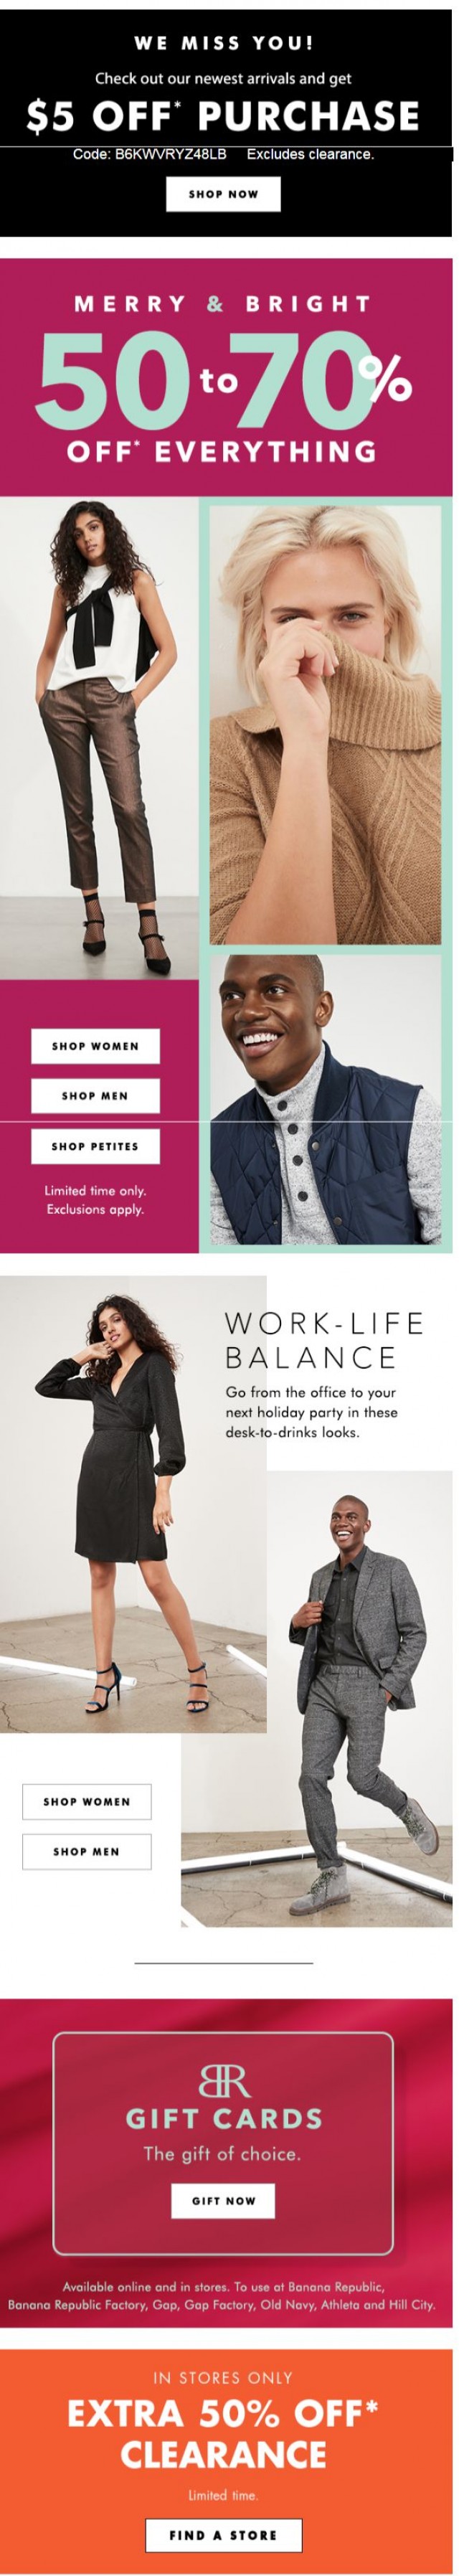 Coupon for: Banana Republic Factory - E-V-E-R-Y-T-H-I-N-G is 50-70% OFF (no, we're not joking)! Act ASAP before the holidays!